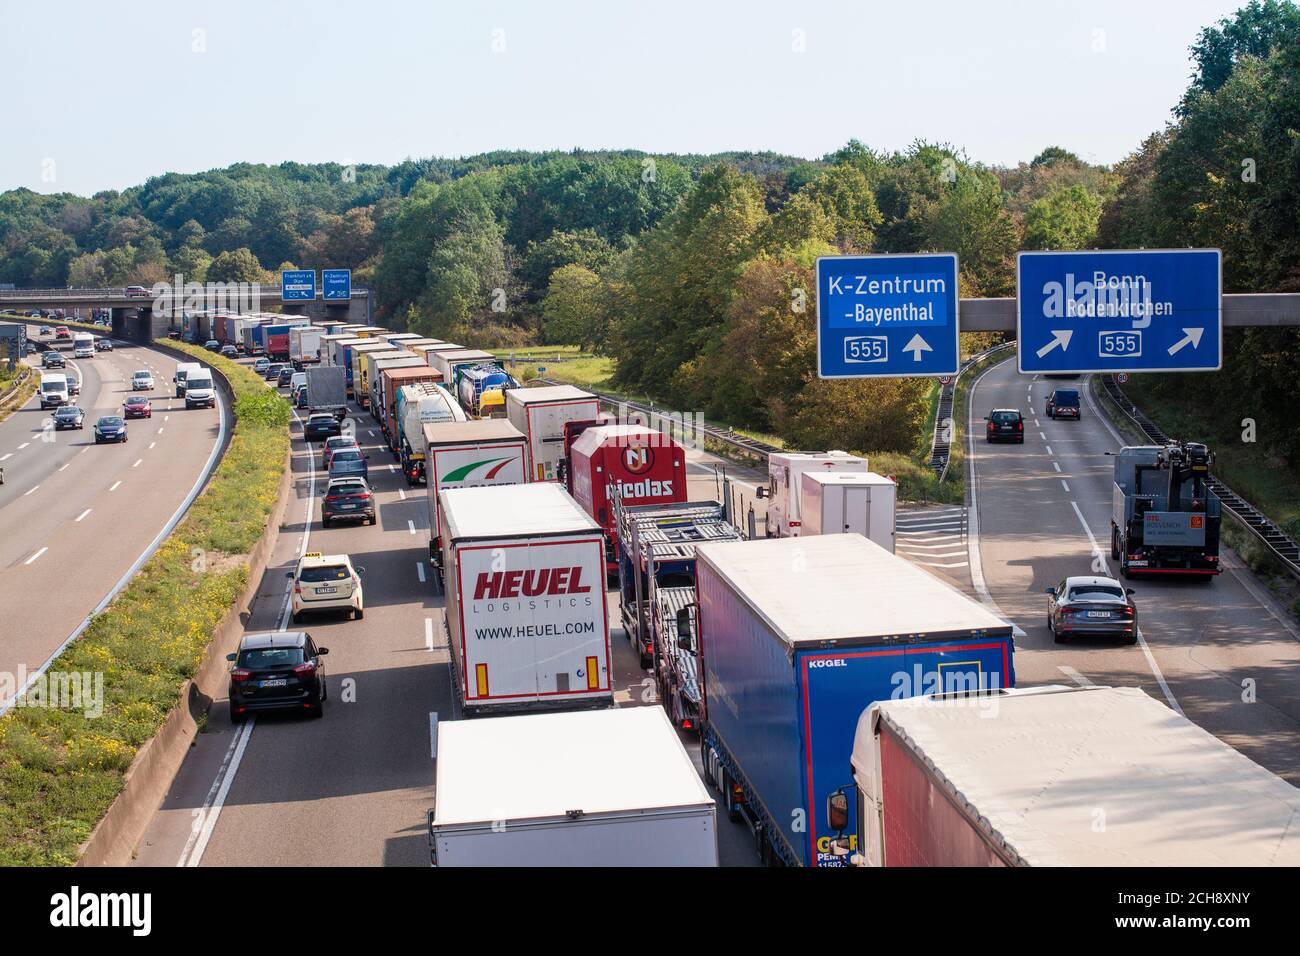 traffic jam on the A4 freeway in the south of Cologne, direction Frankfurt, Cologne, Germany.  Stau auf der Autobahn A4 im Koelner Sueden Fahrtrichtun Stock Photo